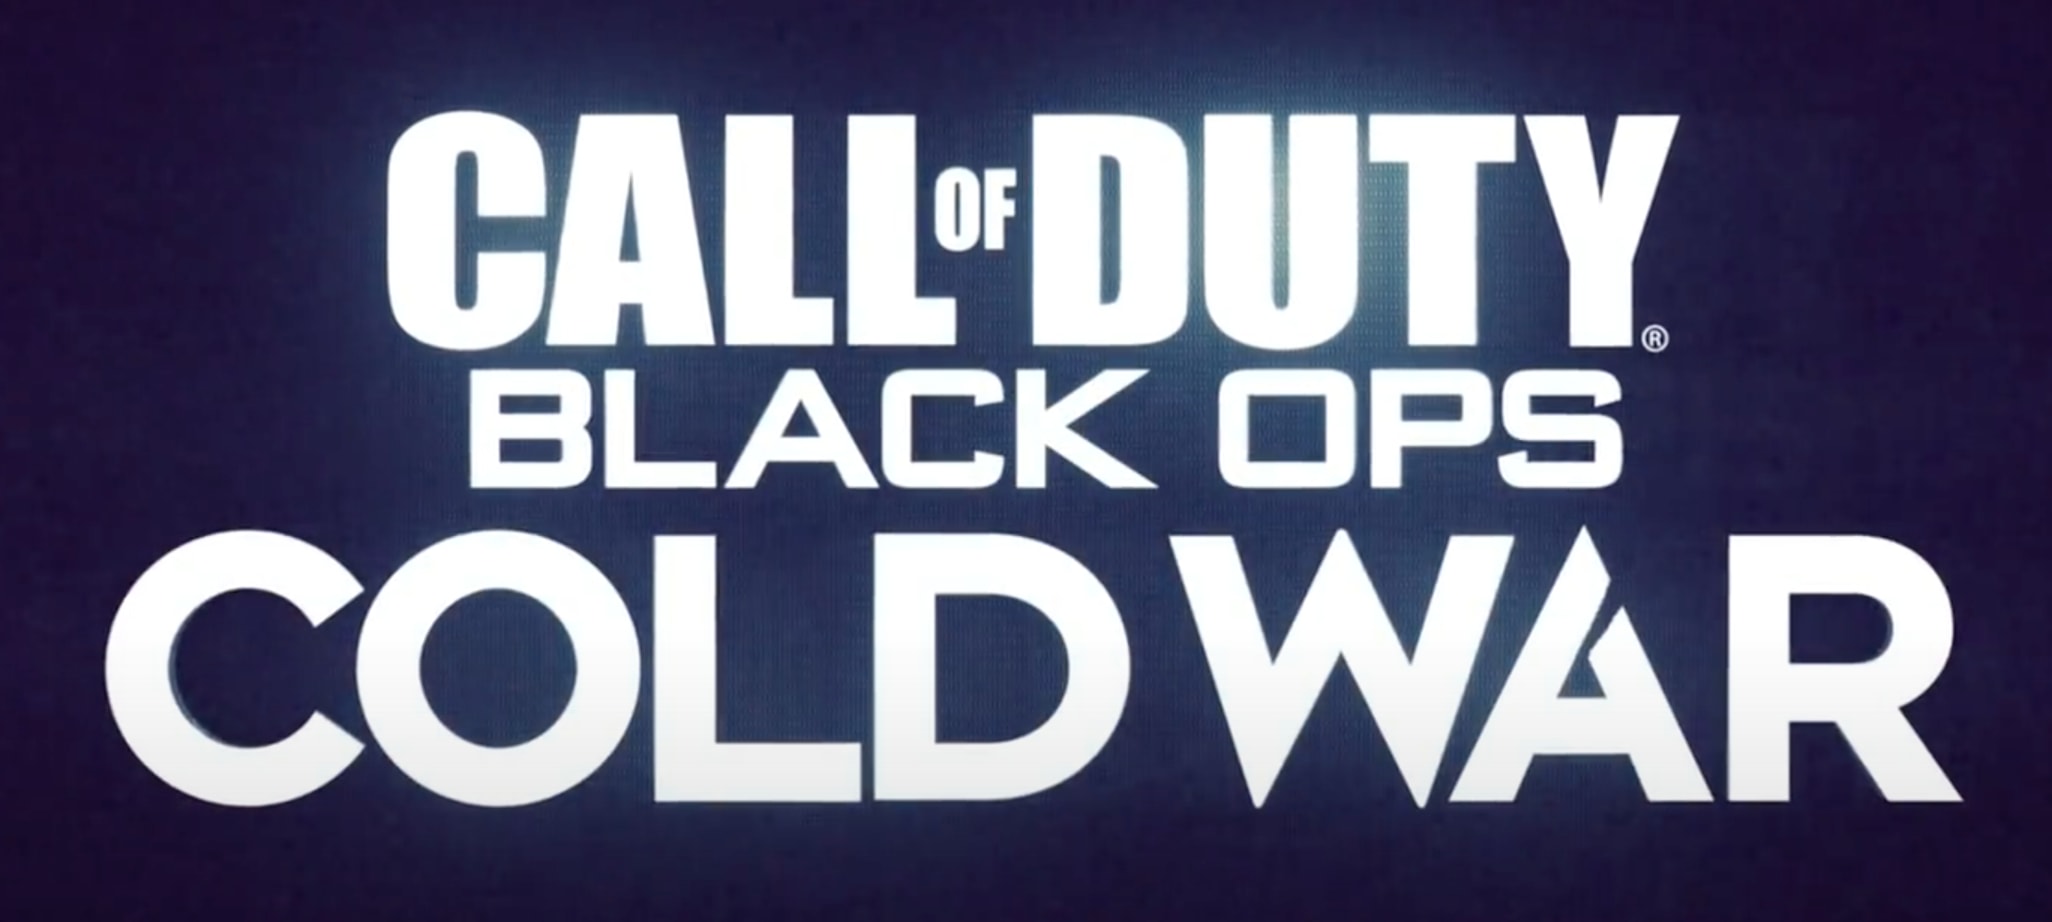 call of duty cold war download size pc